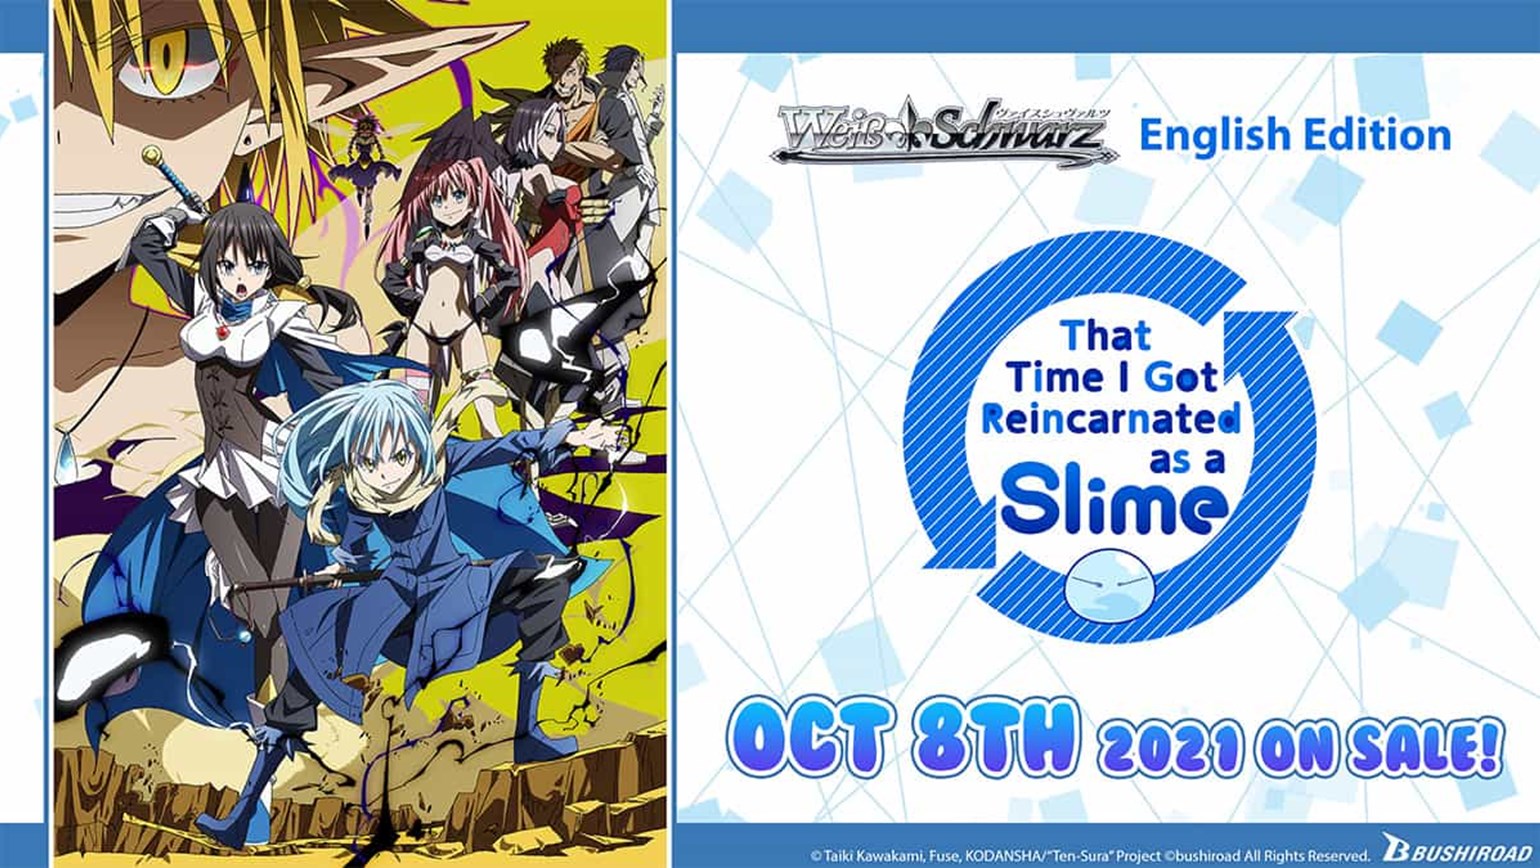 Weiss Schwarz: That Time I Got Reincarnated as a Slime Vol.2 lands this October!